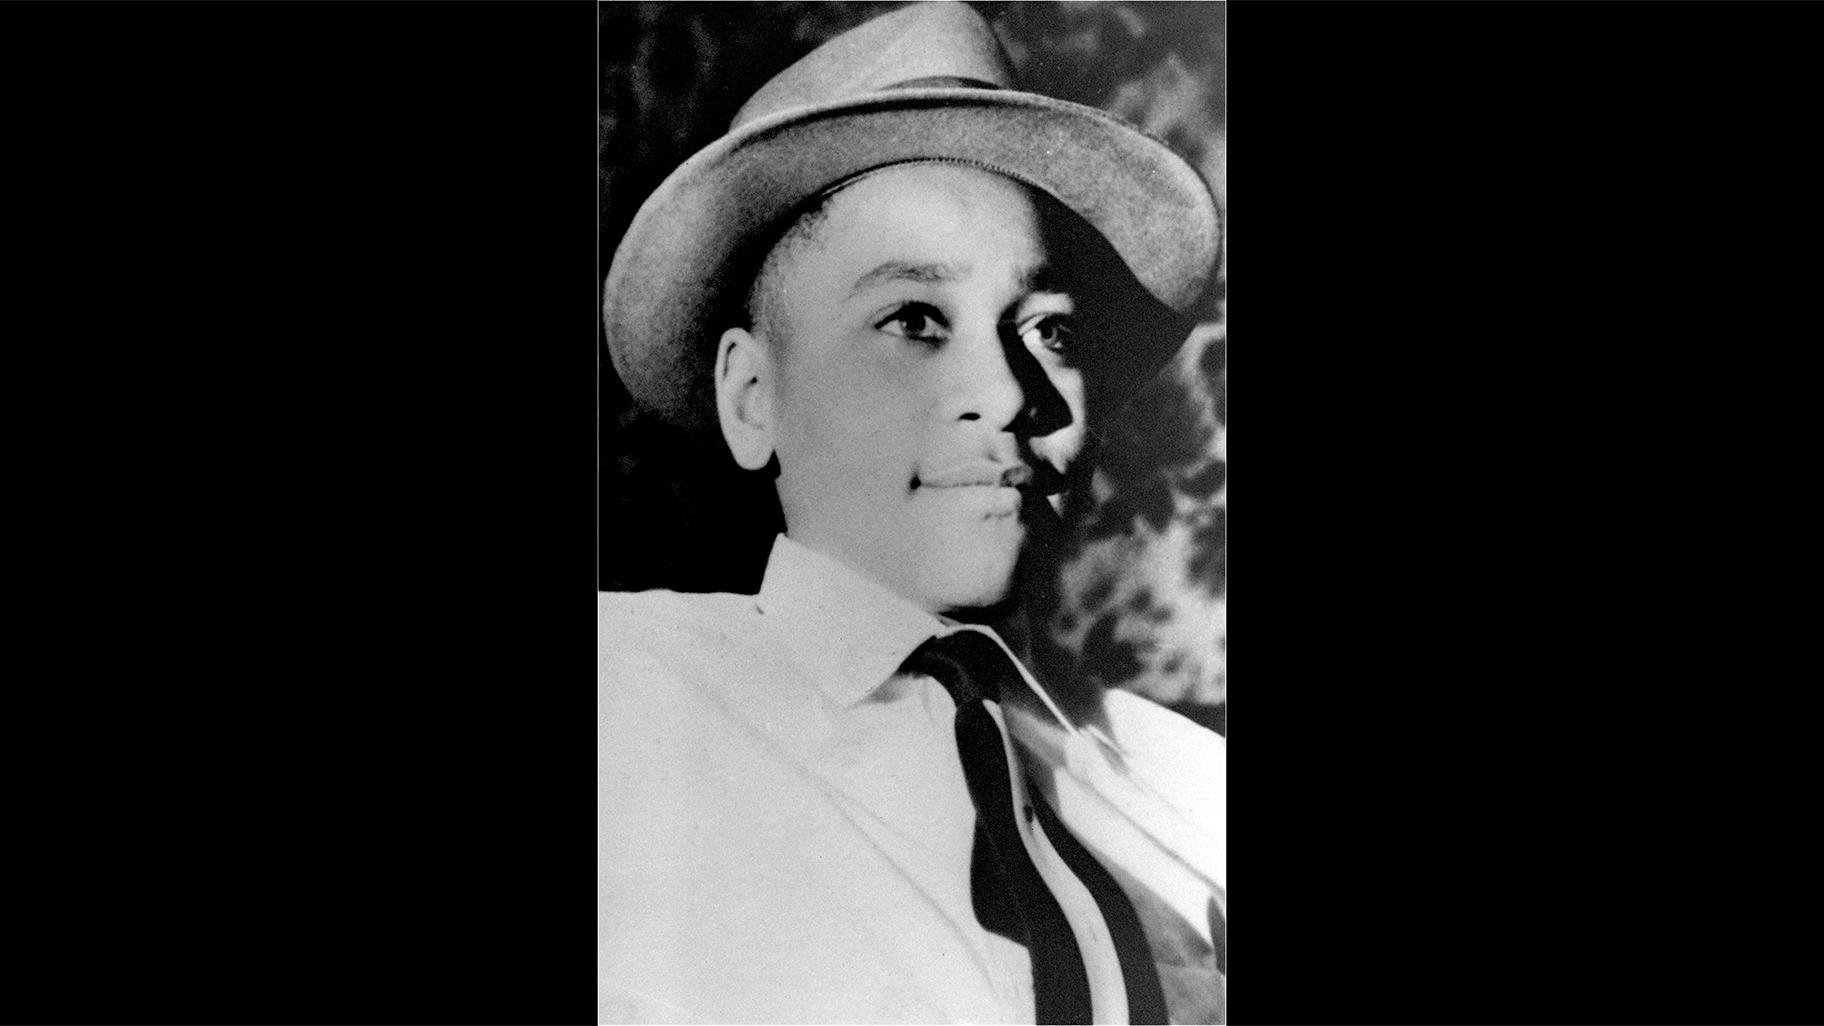  An undated portrait of Emmett Louis Till, a Black 14-year-old Chicago boy, whose weighted down body was found in the Tallahatchie River near the Delta community of Money, Mississippi, August 31, 1955. (AP Photo, File)